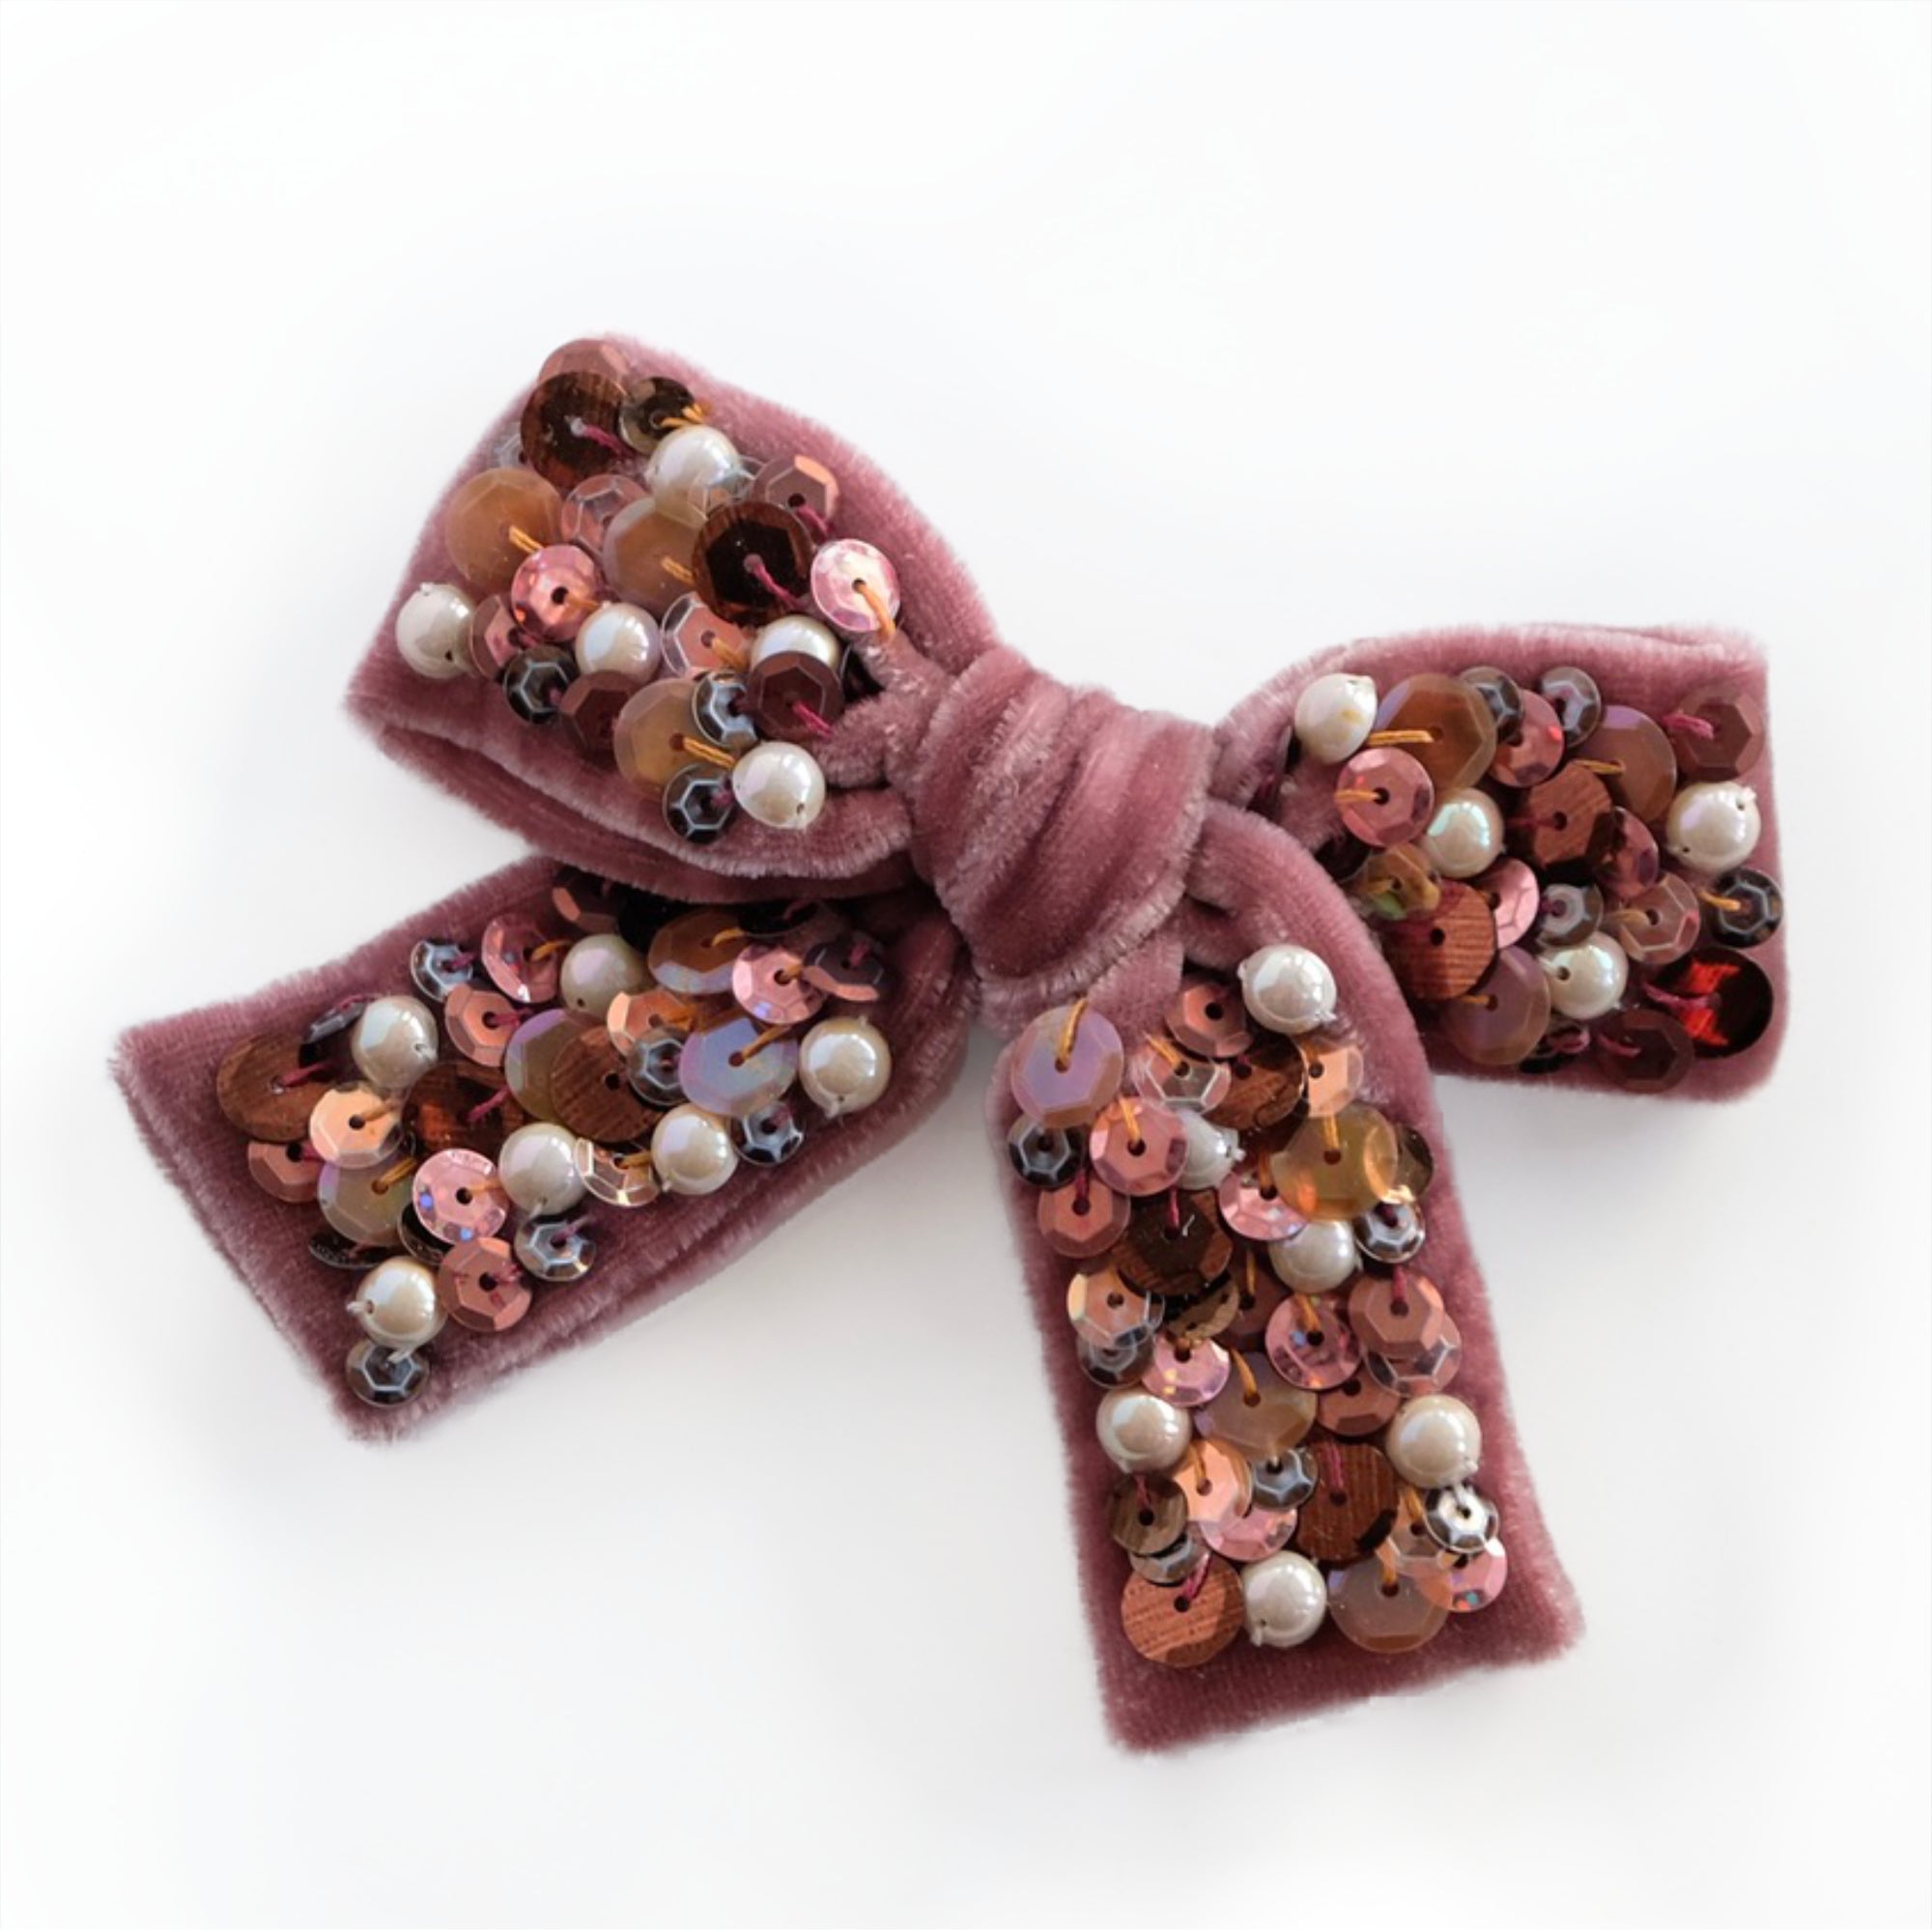 Velvet hair bow in light rusty brown embellished with sequin and pearl beads.